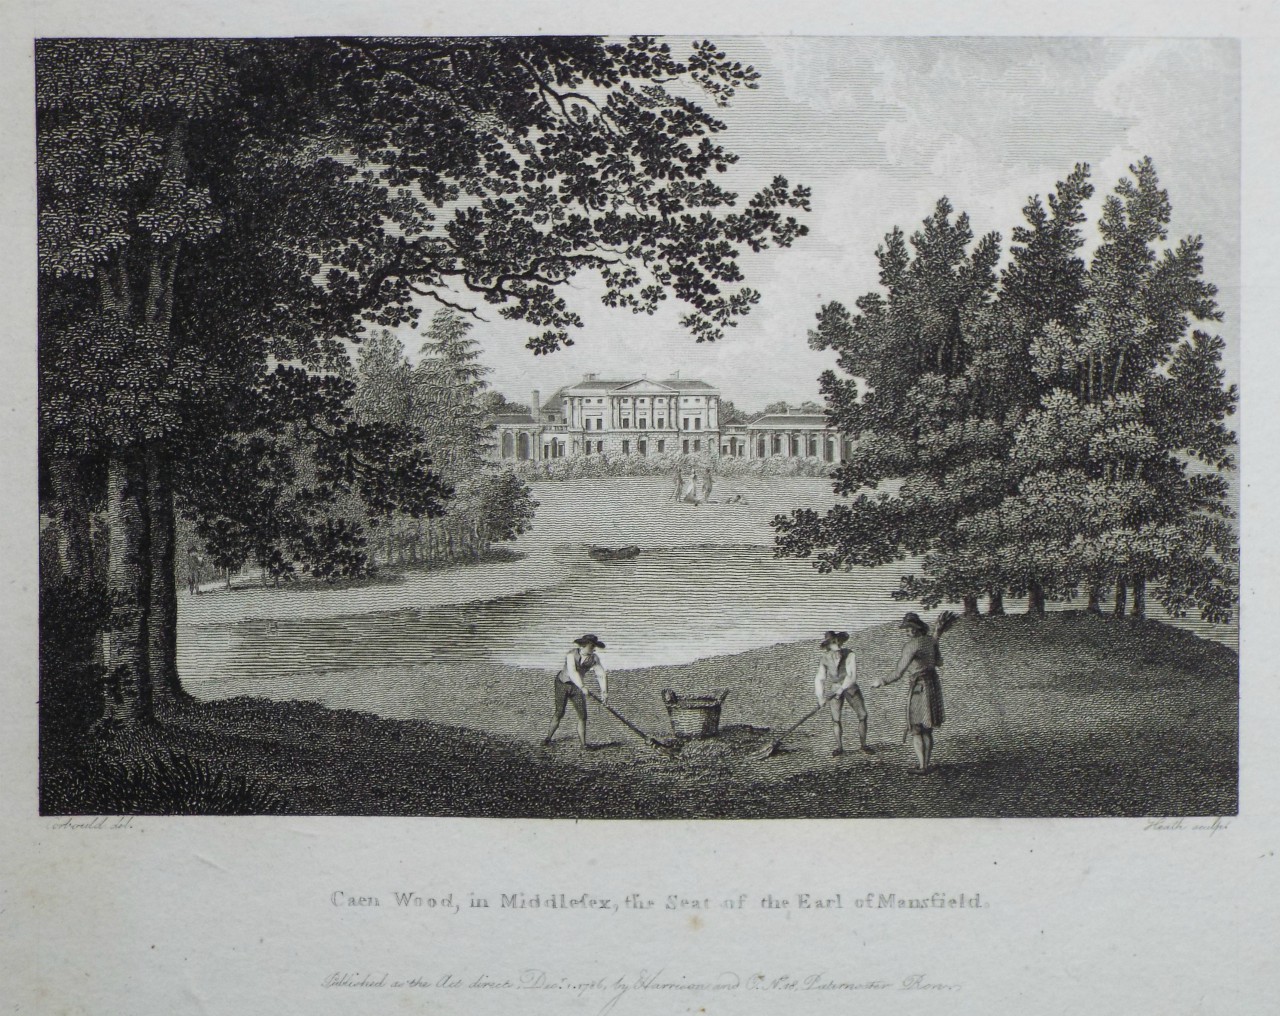 Print - Caen Wood, in Middlesex, the Seat of the Earl of Mansfield. - 